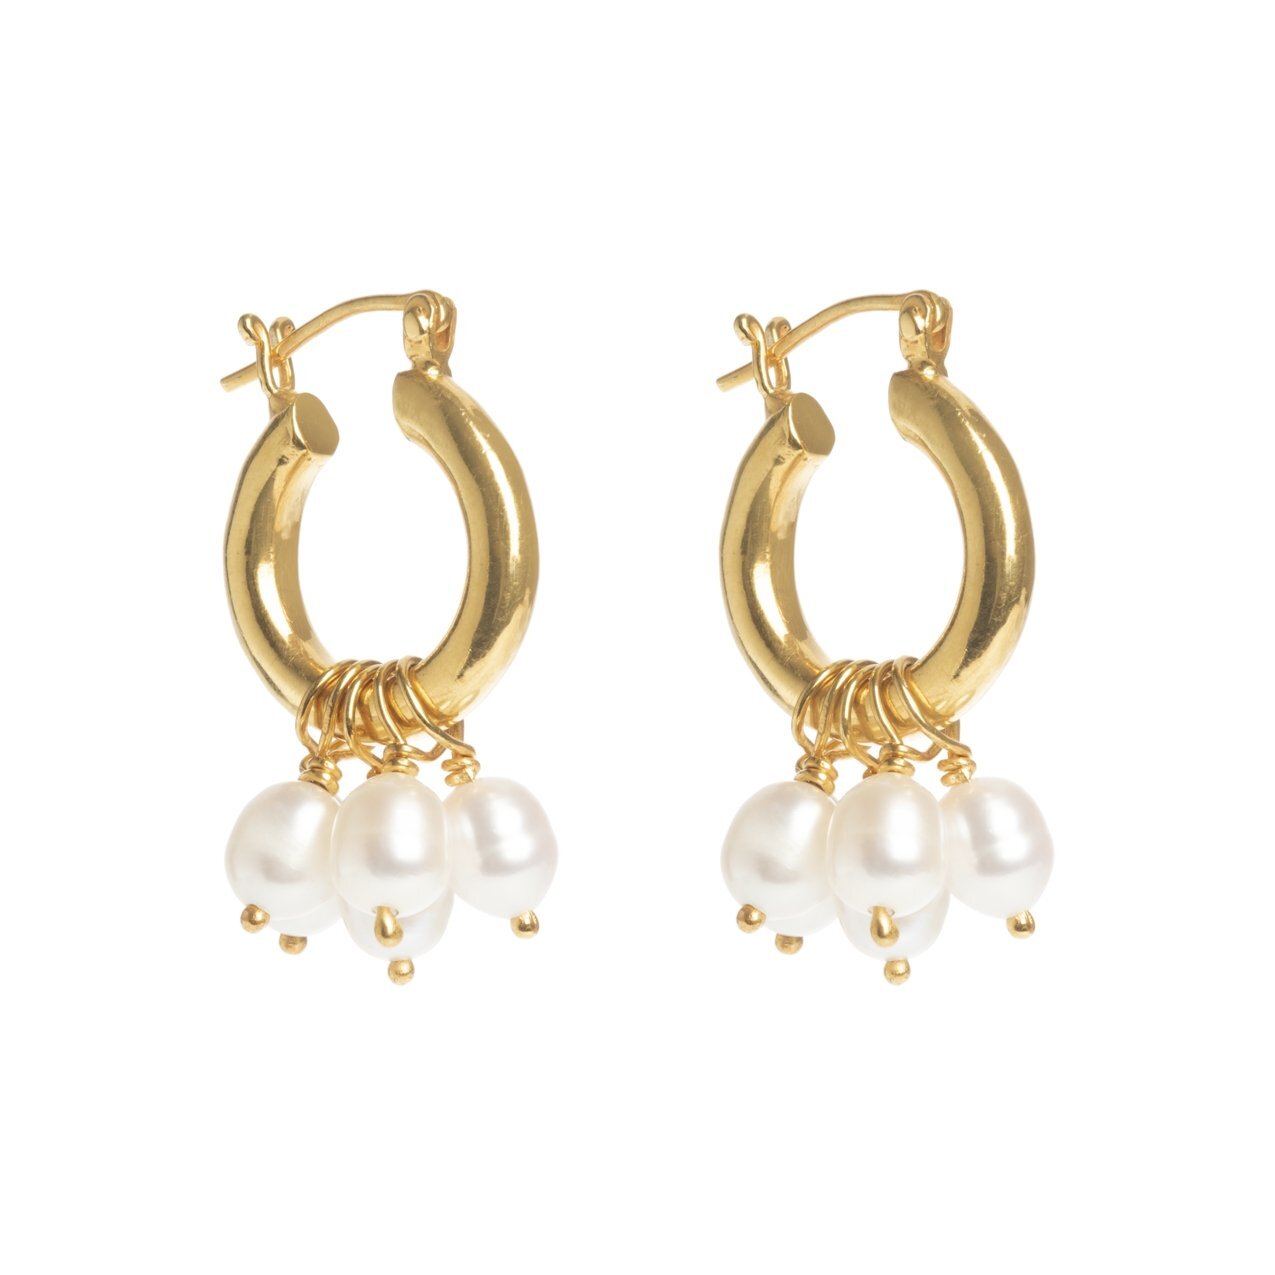 gold-hoops-with-pearls--LR_1800x1800.jpeg